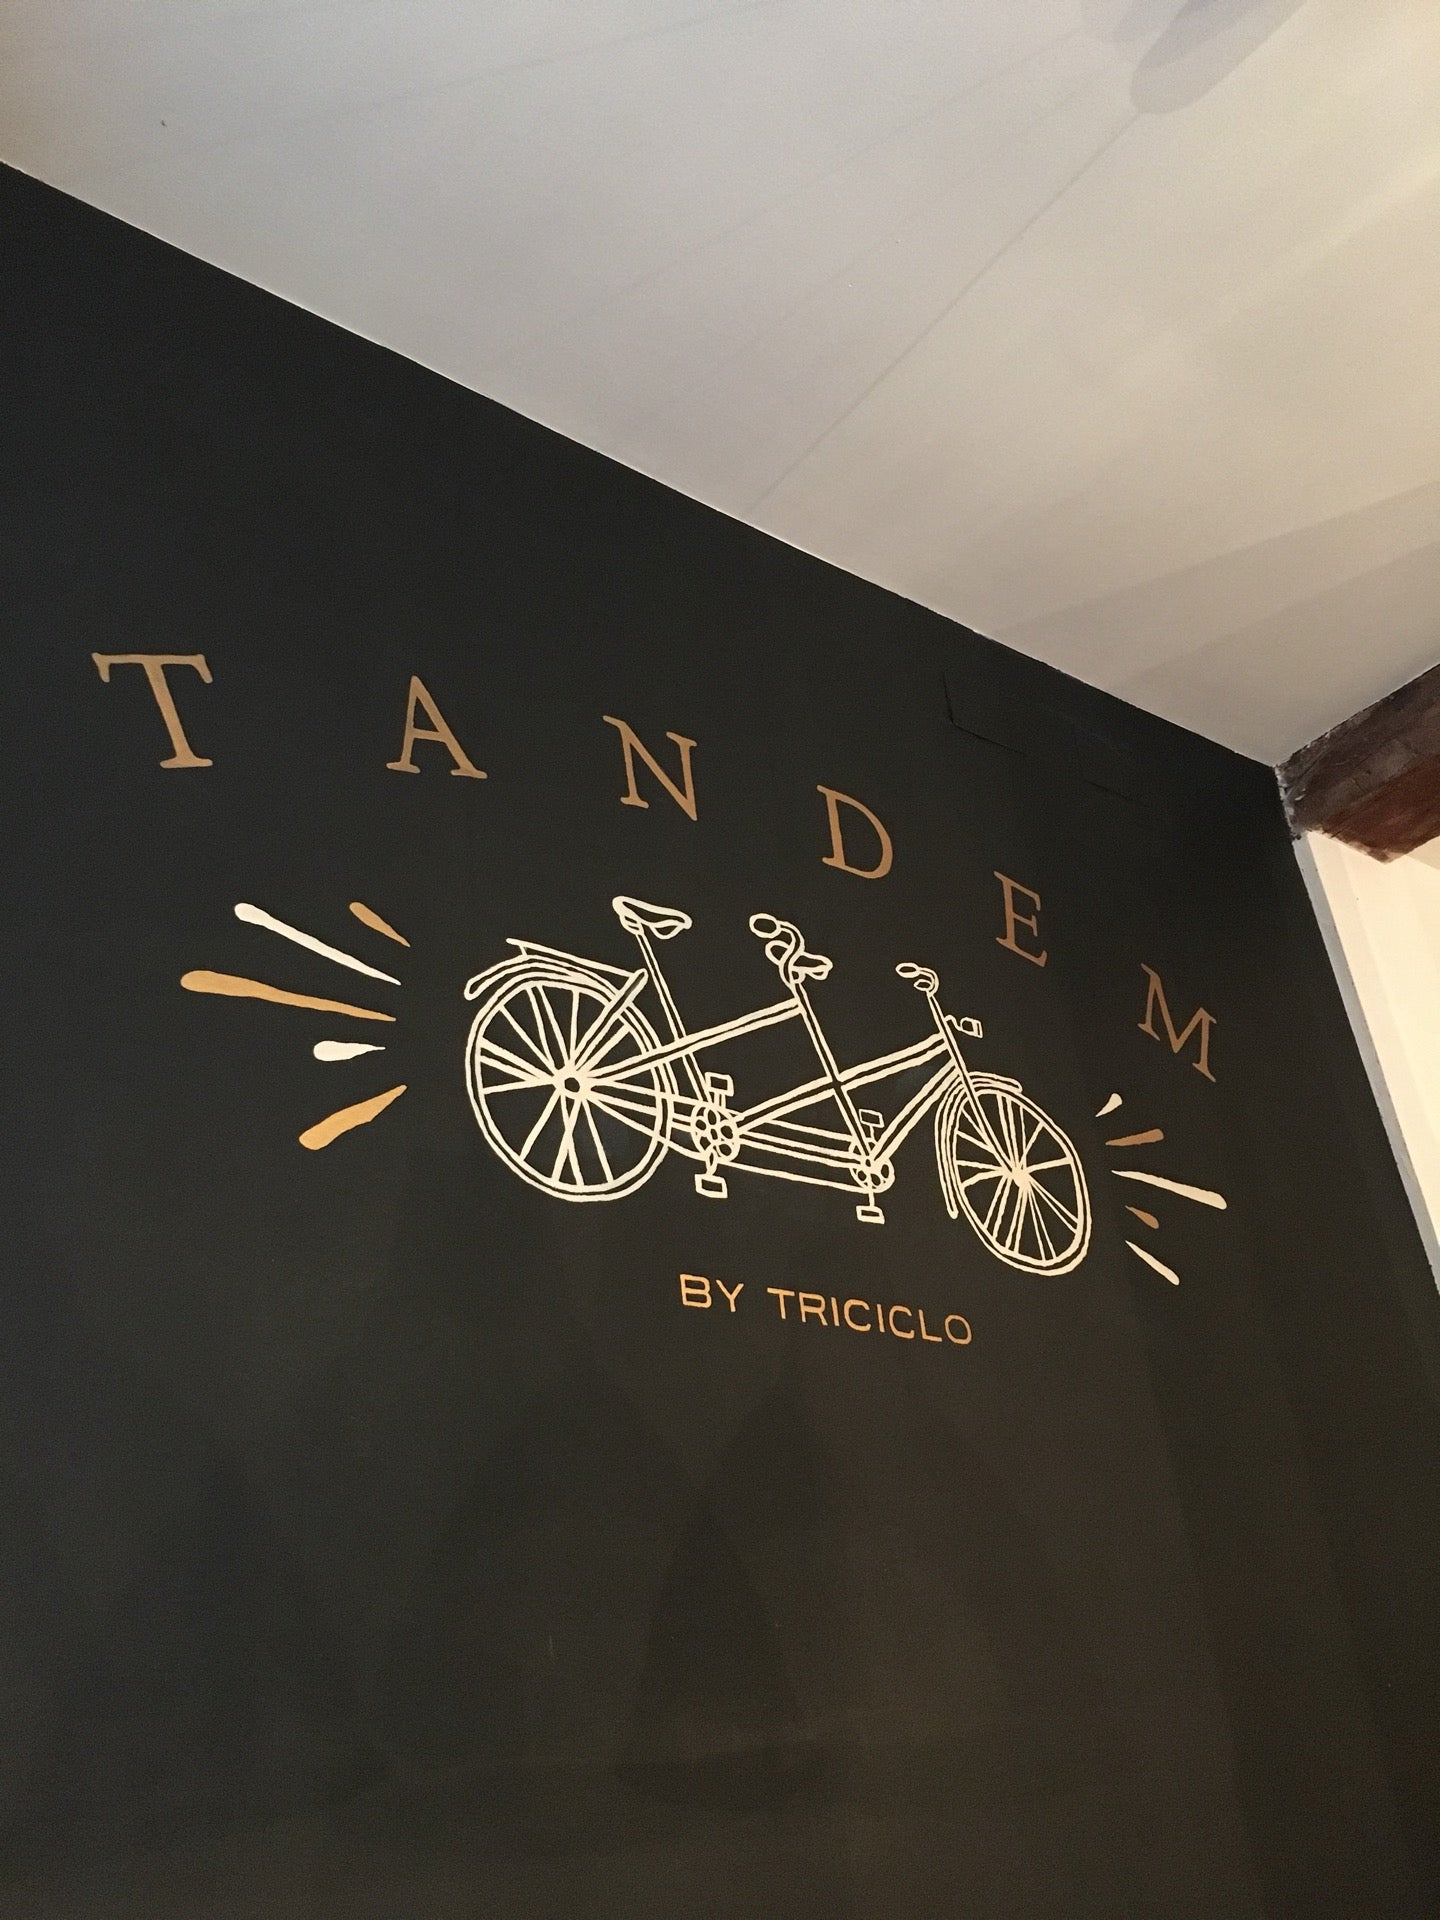 Tandem by Triciclo